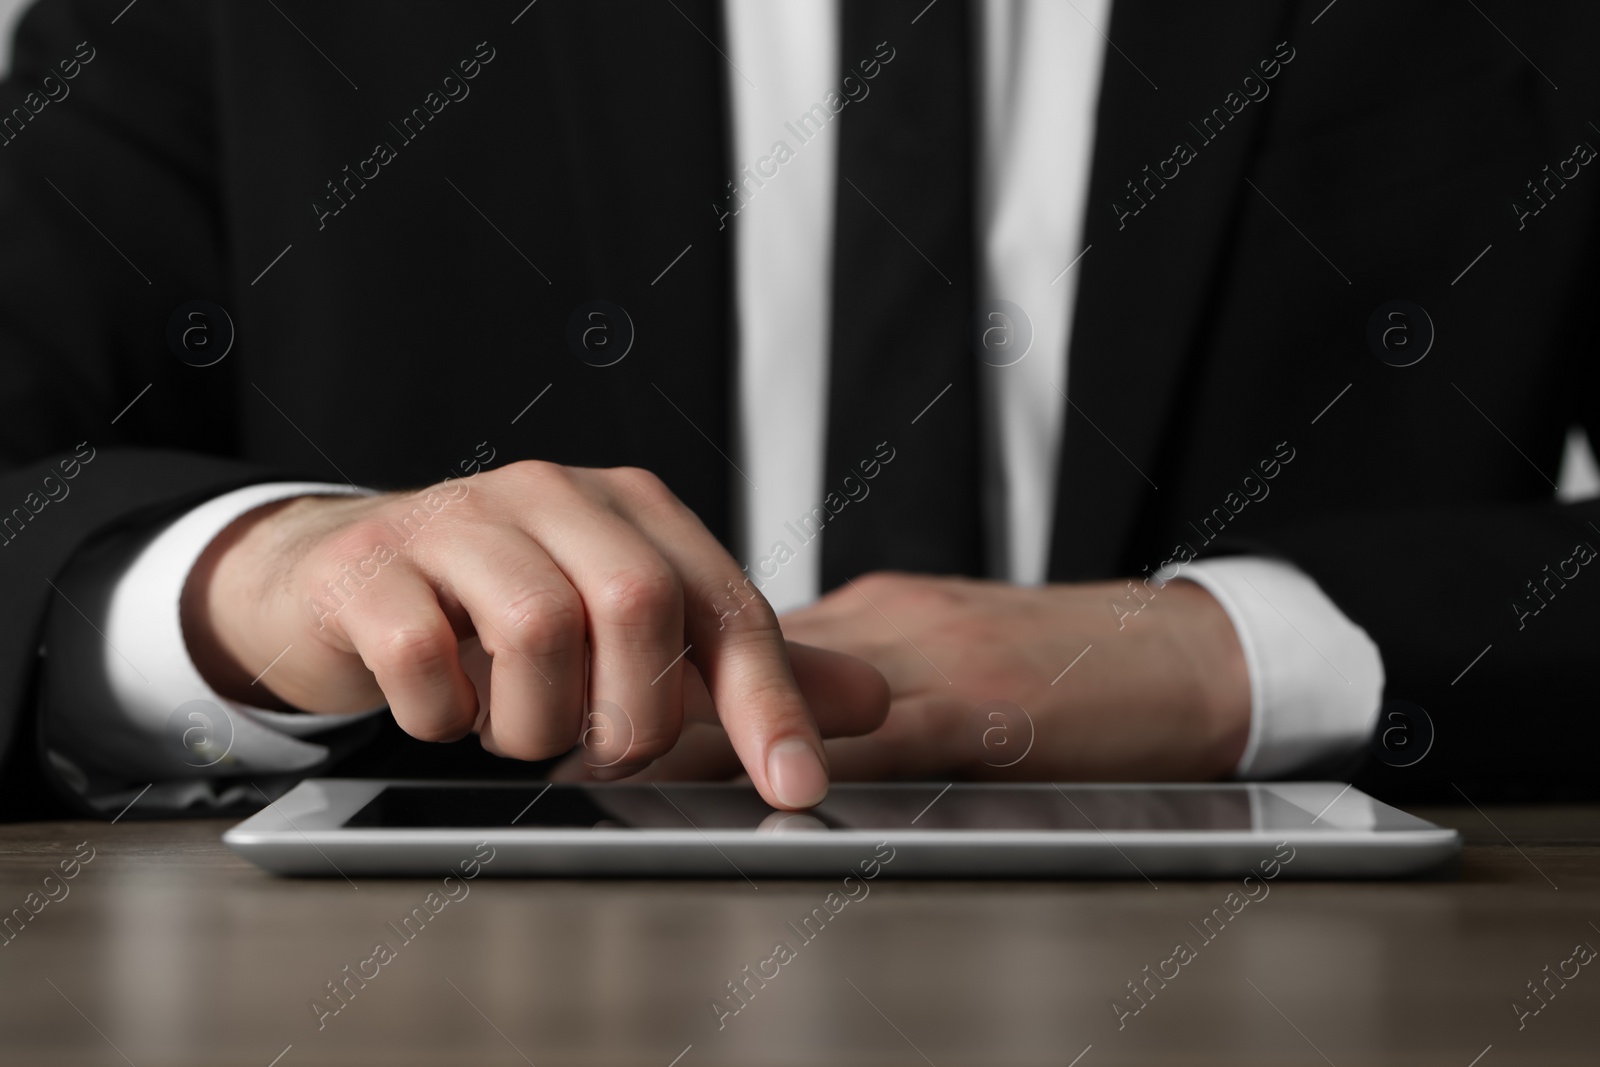 Photo of Closeup view of man using new tablet at wooden desk indoors